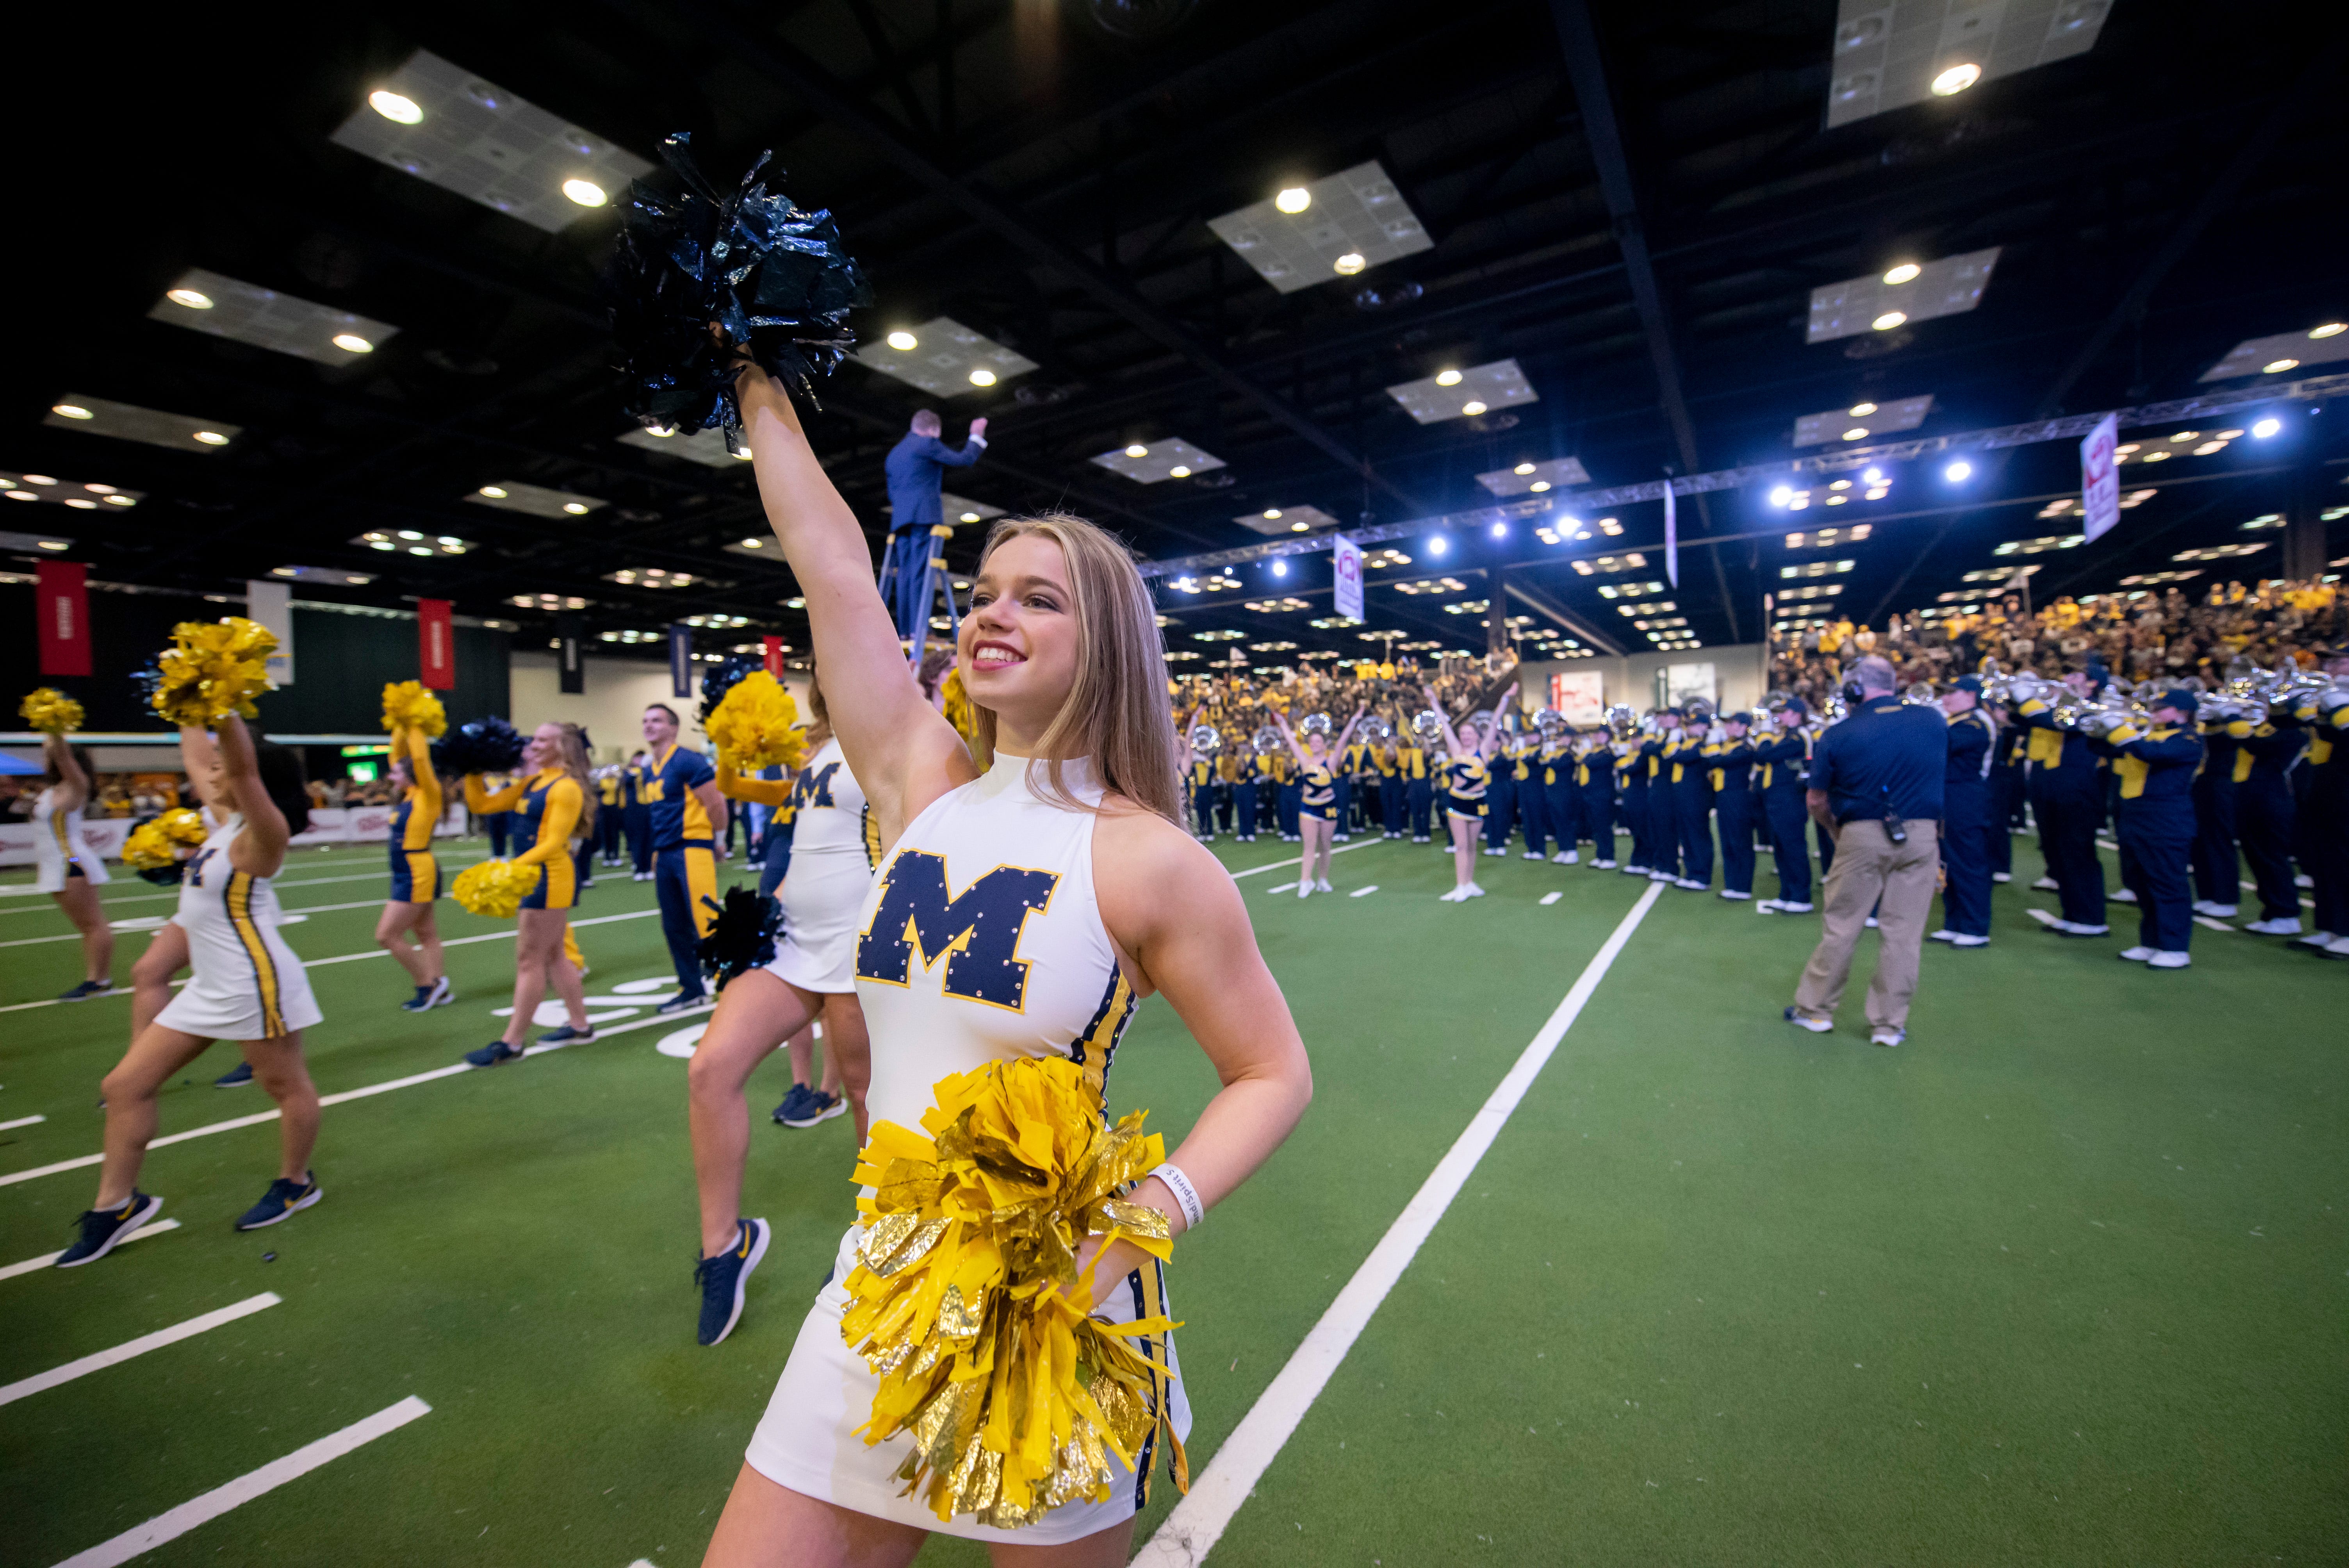 Michigan cheerleaders perform with the Marching Band at the Fan Fest at the Indiana Convention Center, before the start of the Big Ten championship game.